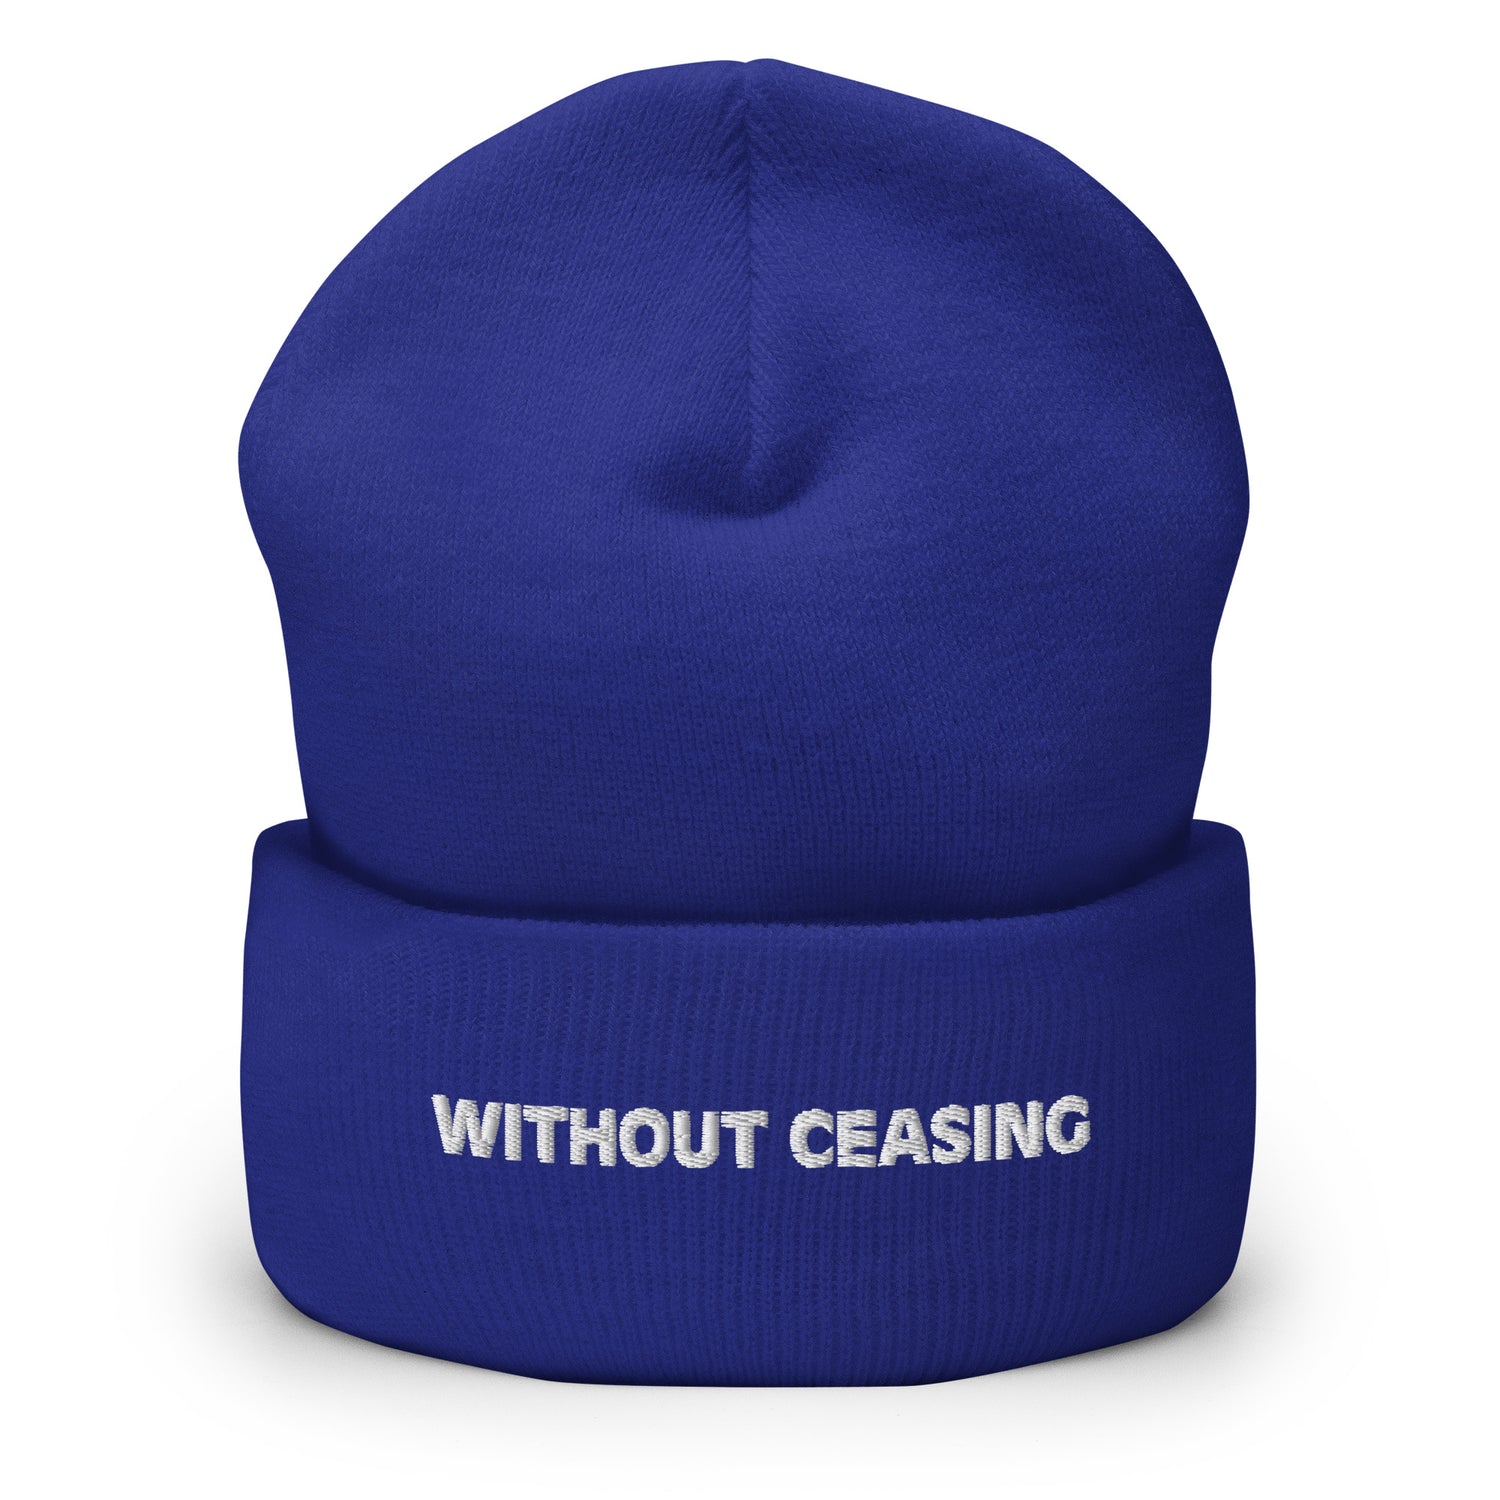 WITHOUT CEASING